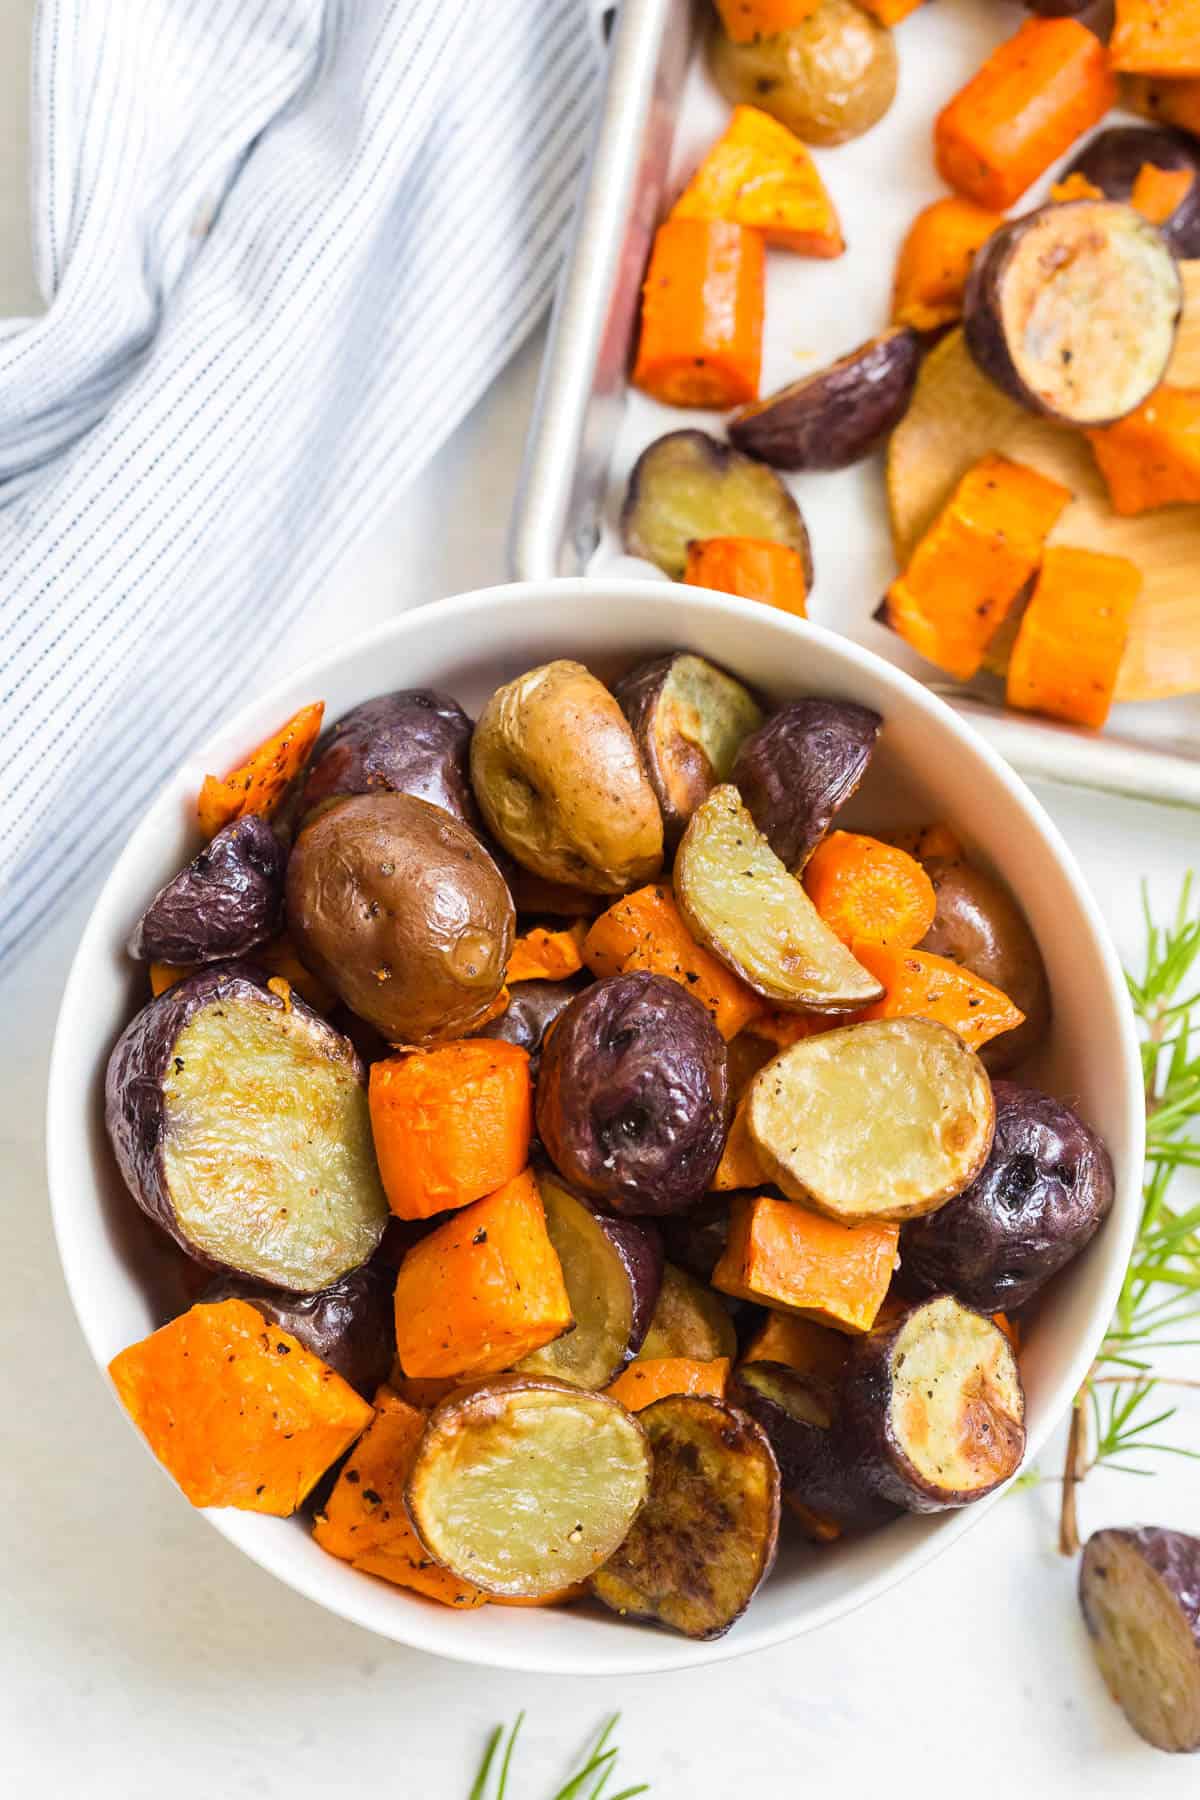 Roasted root vegetables in a white bowl.